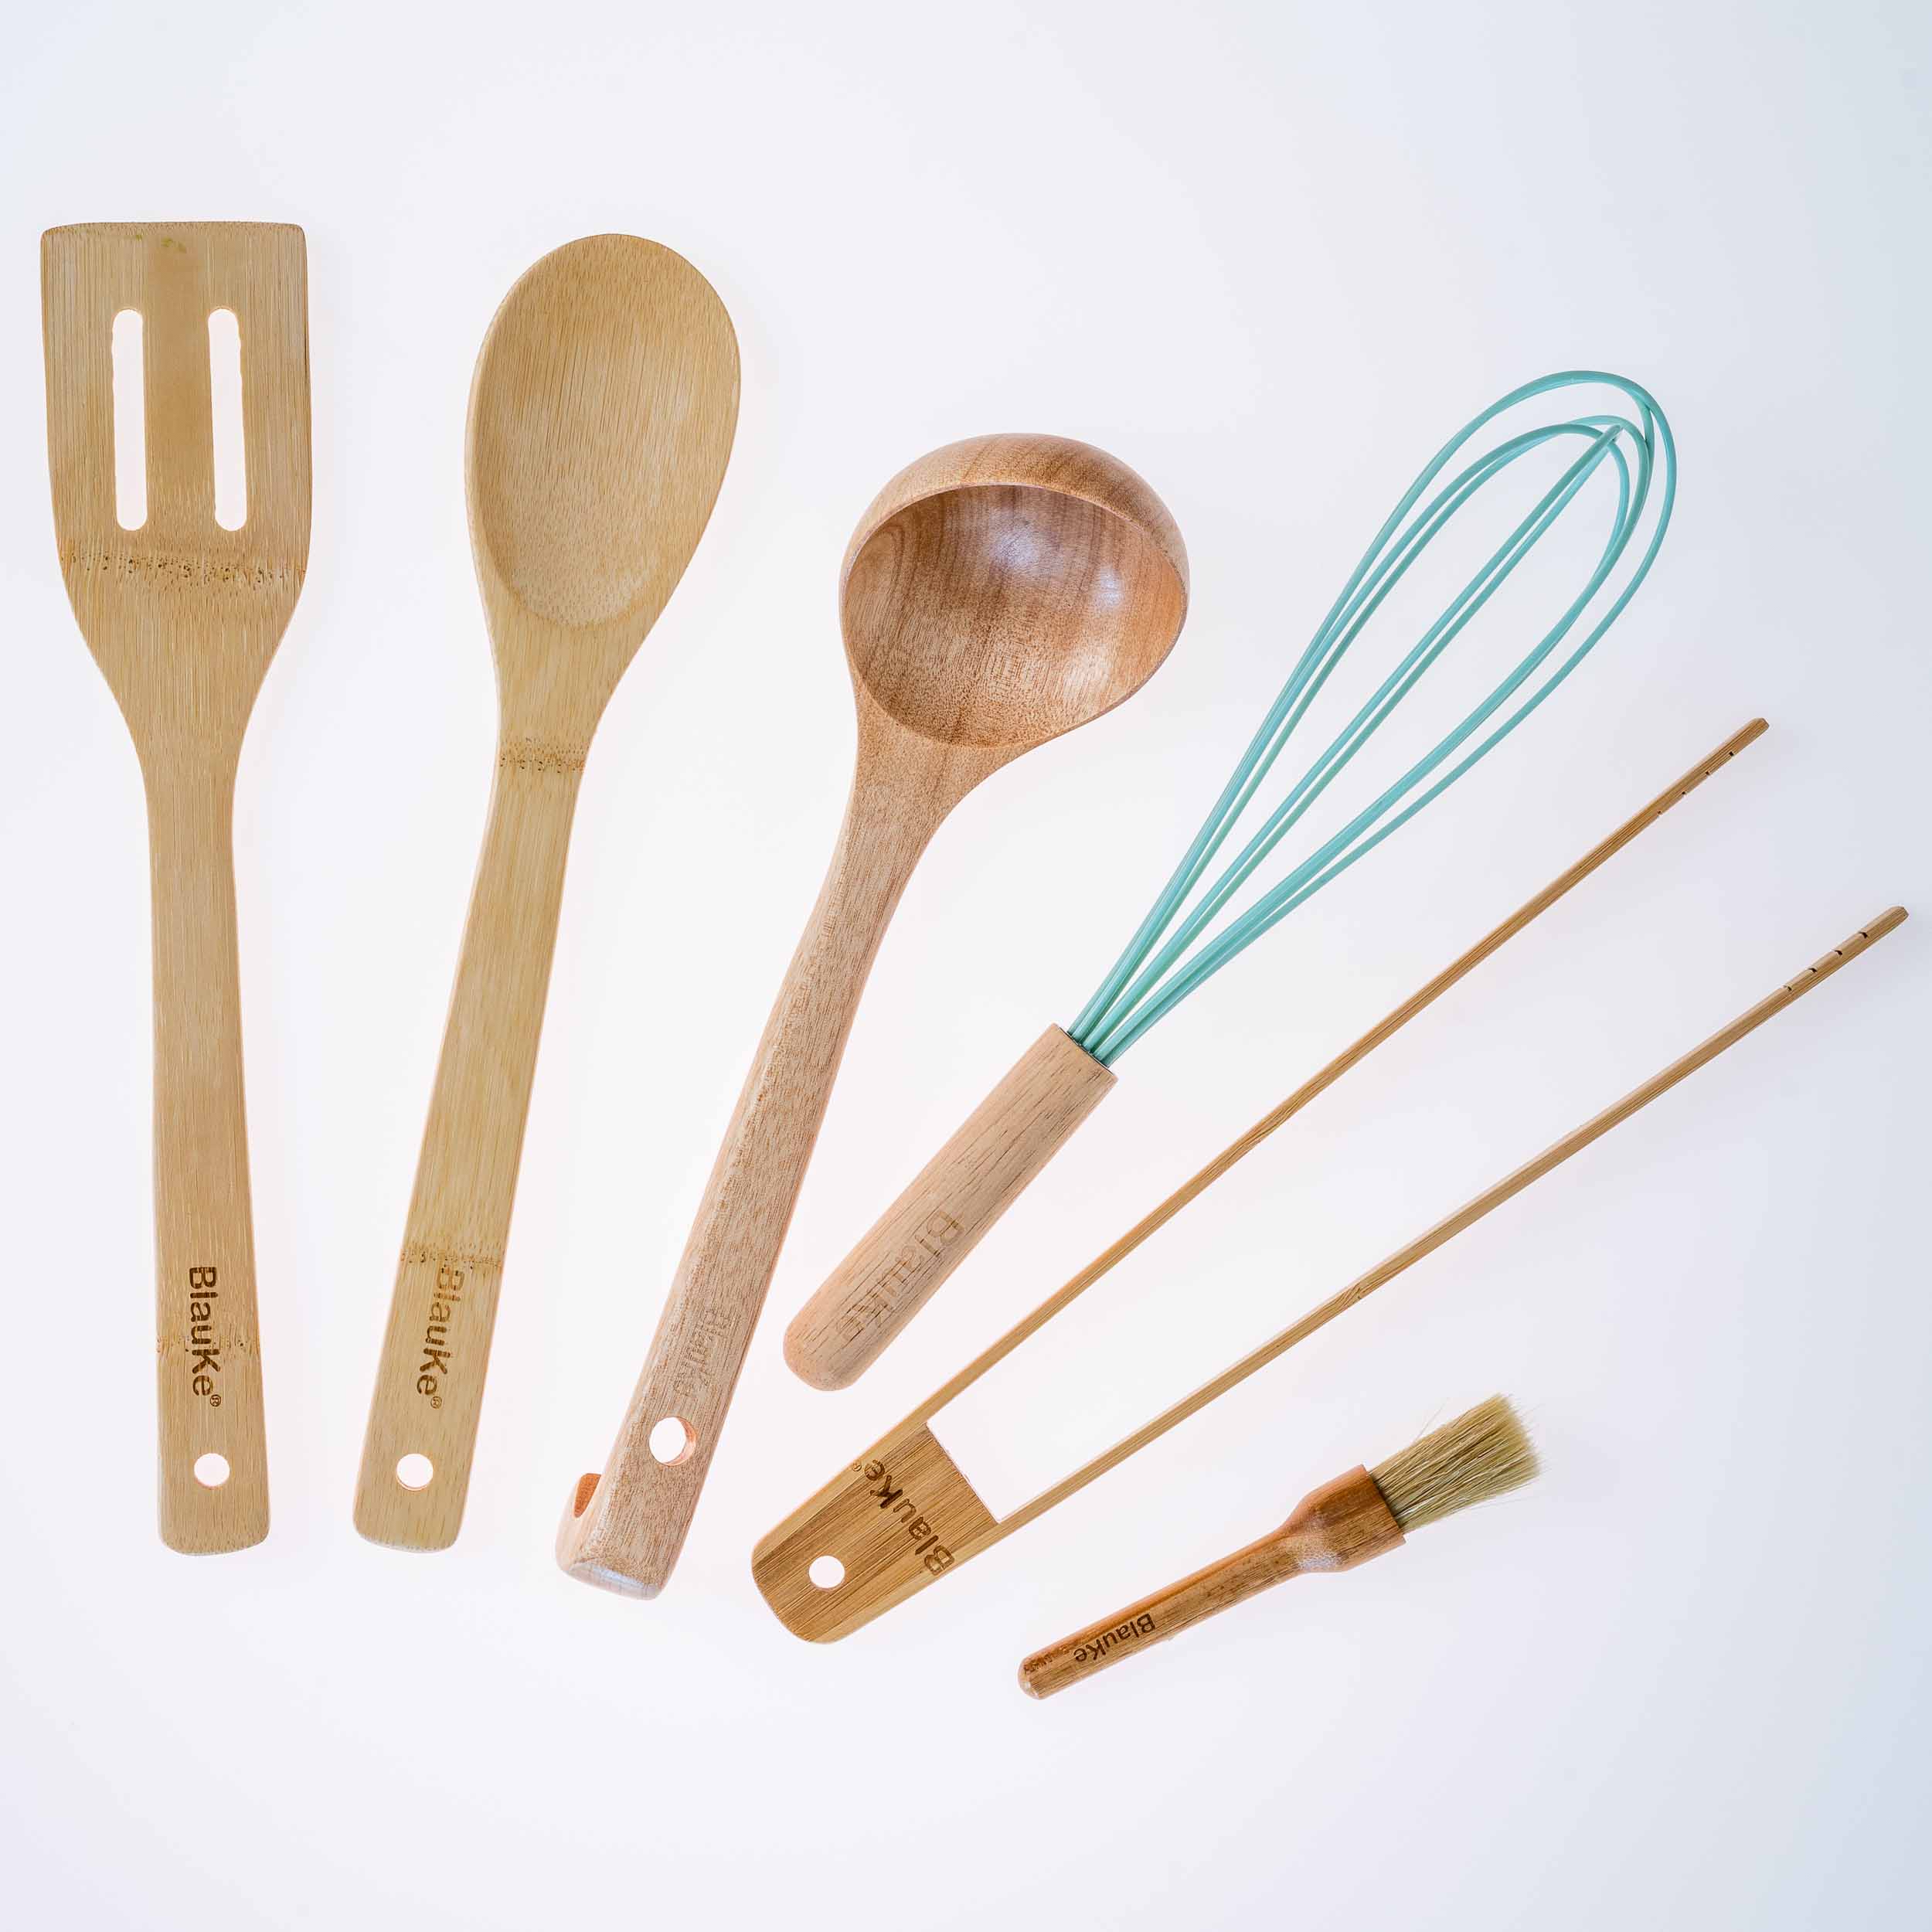 Bamboo Cooking Utensils Set of 6 - Wooden Kitchen Utensils for Non Stick Cookware - Wooden Spoon, Spatula, Tongs, Ladle, Whisk, Brush